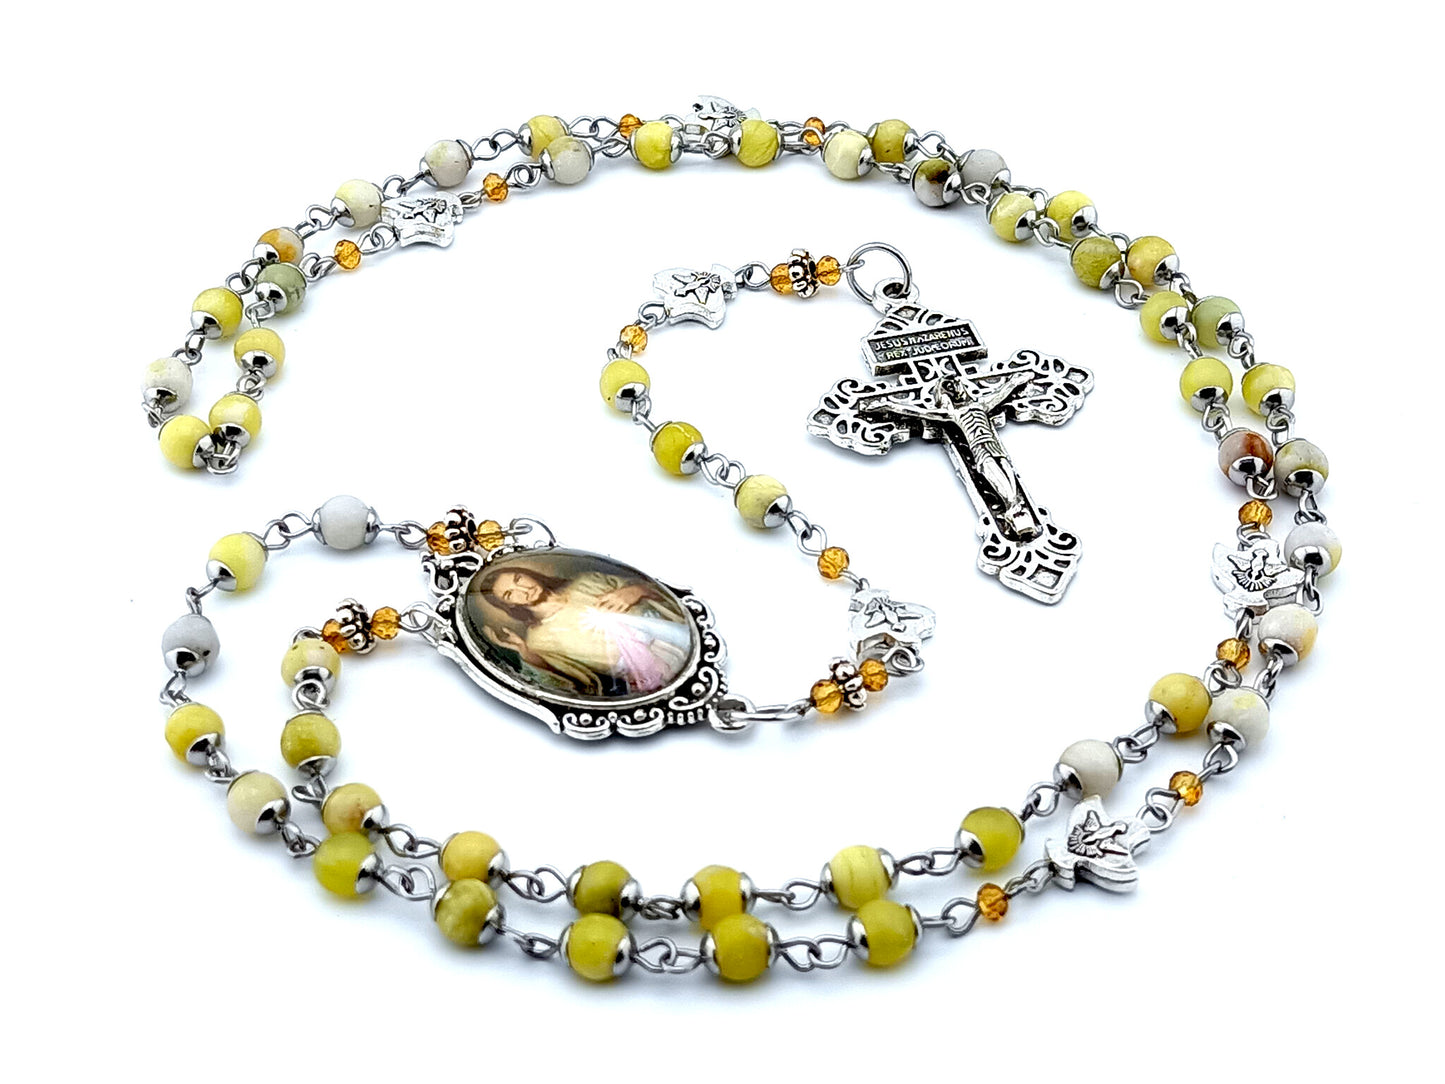 Divine Mercy and Our Lady of Grace unique rosary beads citrine gemstone rosary beads with Holy Spirit Our Father beads and pardon crucifix.